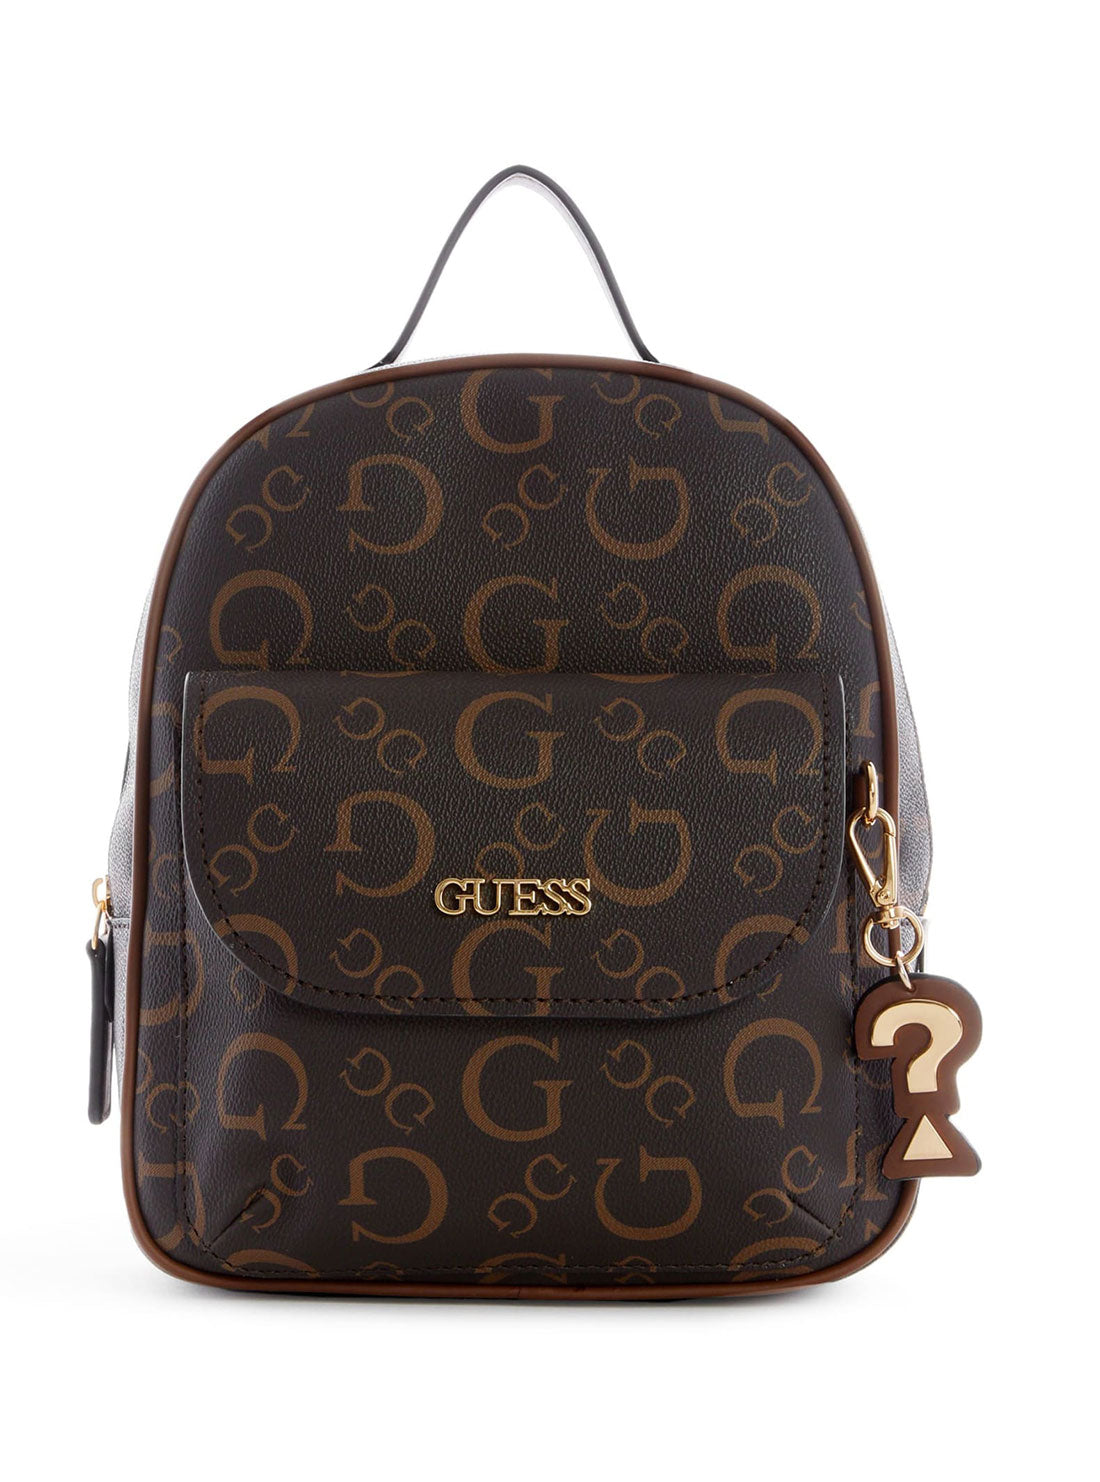 GUESS Women's Natural Collins Backpack SB864030 Front View